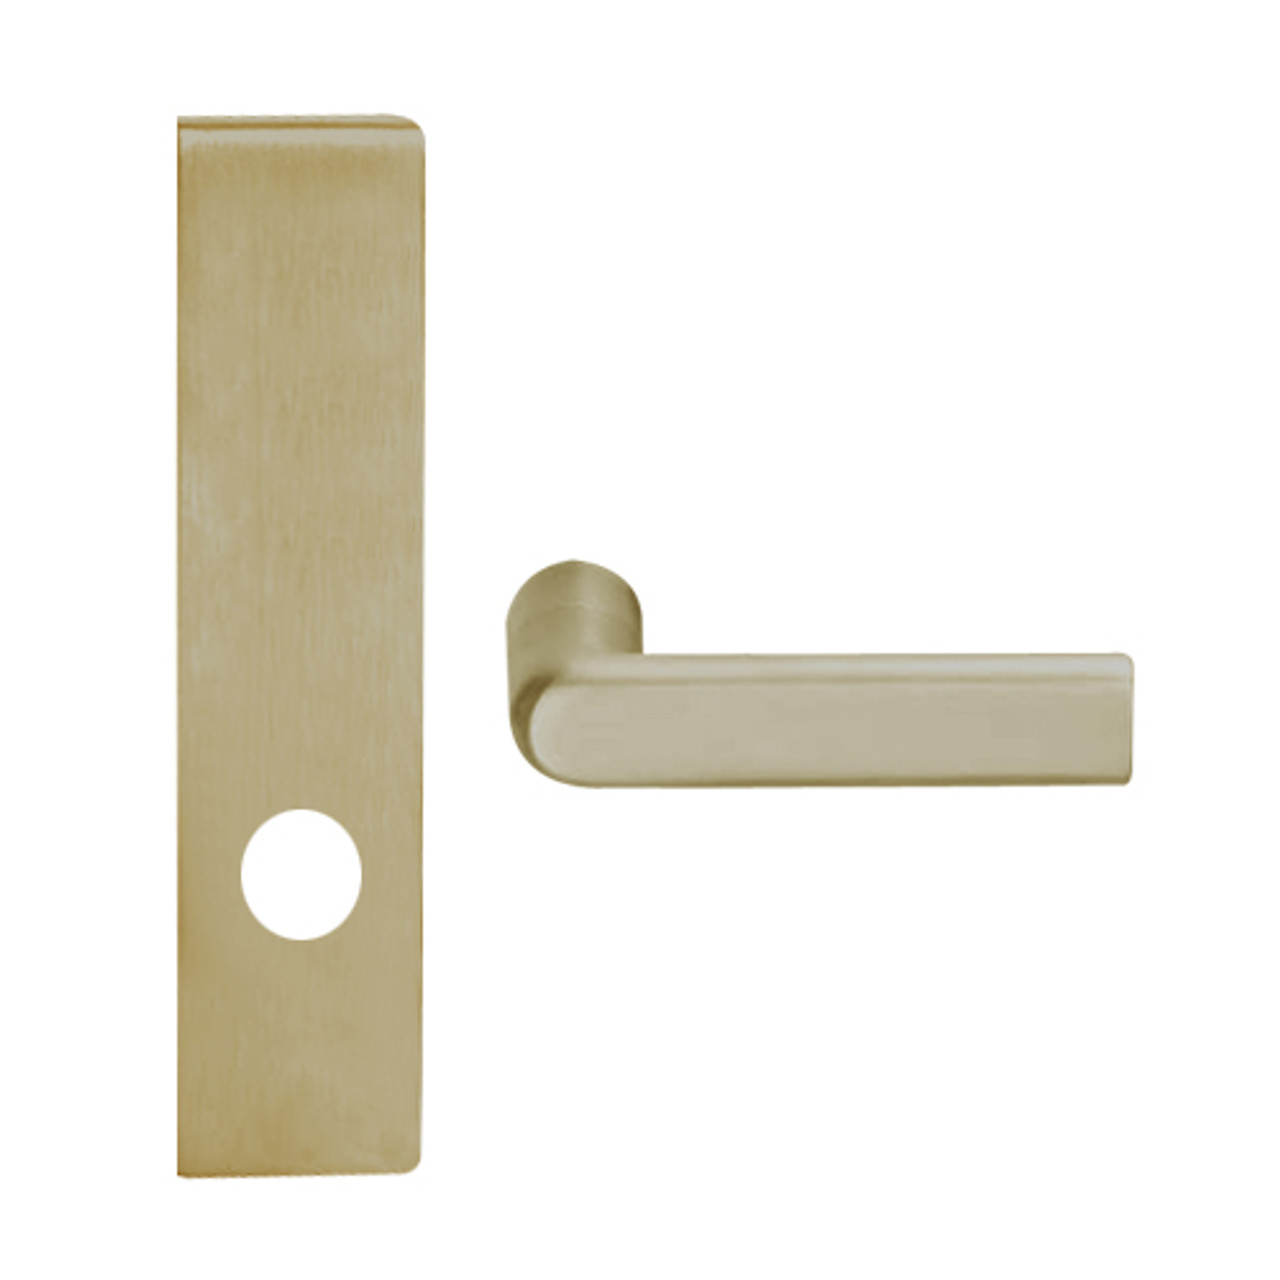 L9010-01L-612 Schlage L Series Passage Latch Commercial Mortise Lock with 01 Cast Lever Design in Satin Bronze